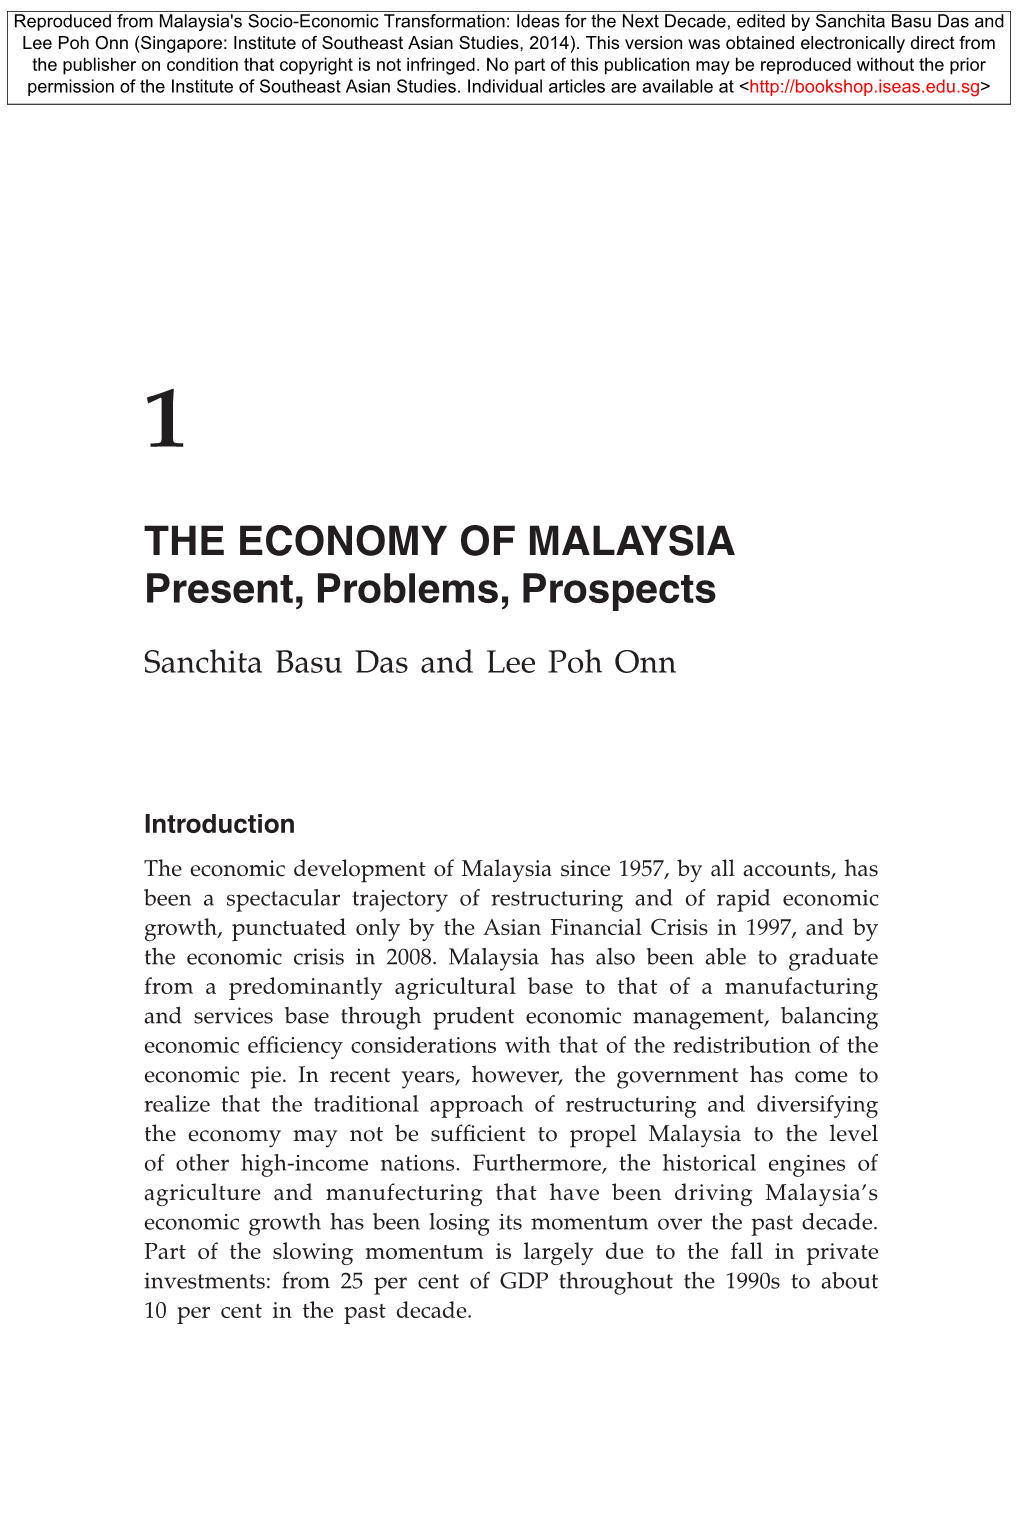 The Economy of Malaysia Present, Problems, Prospects